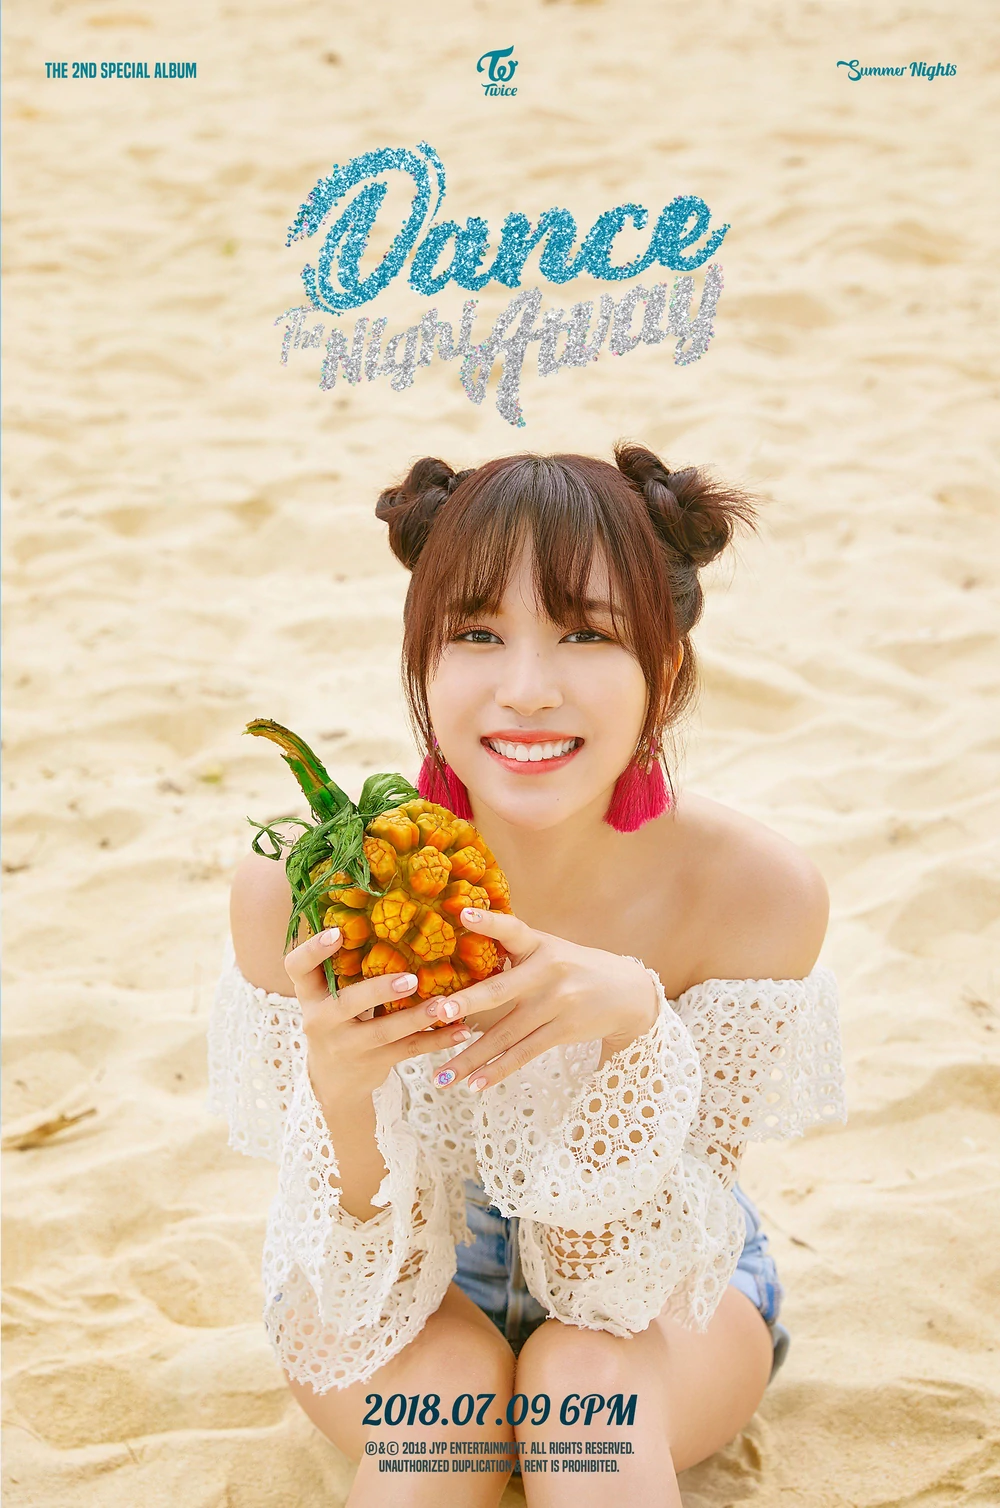 Twice Summer Nights Mina Concept Teaser Picture Image Photo Kpop K-Concept 3